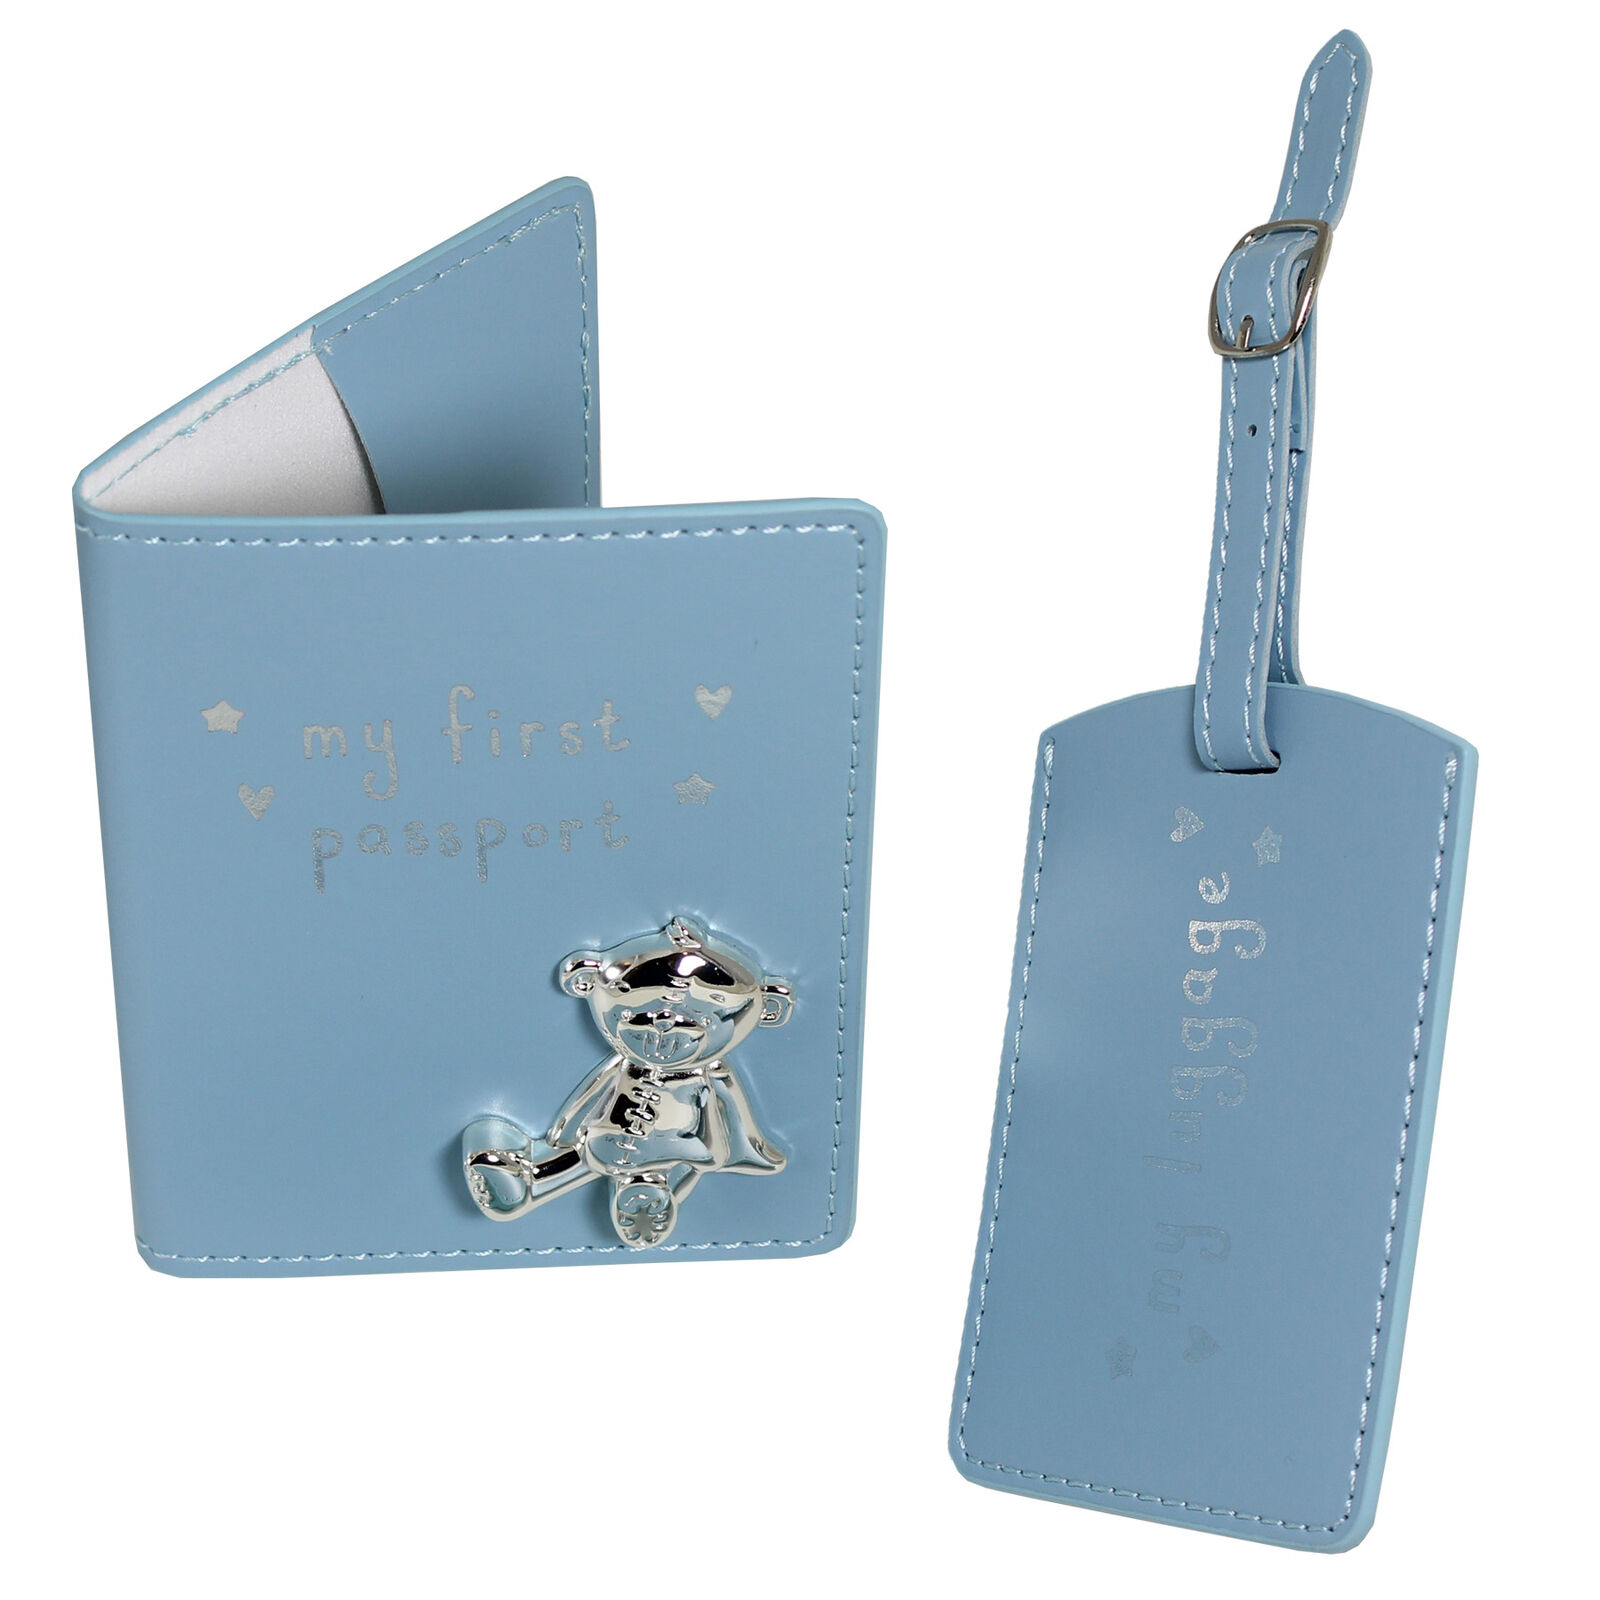 Button Corner First Passport Cover Luggage Tag Set - Blue